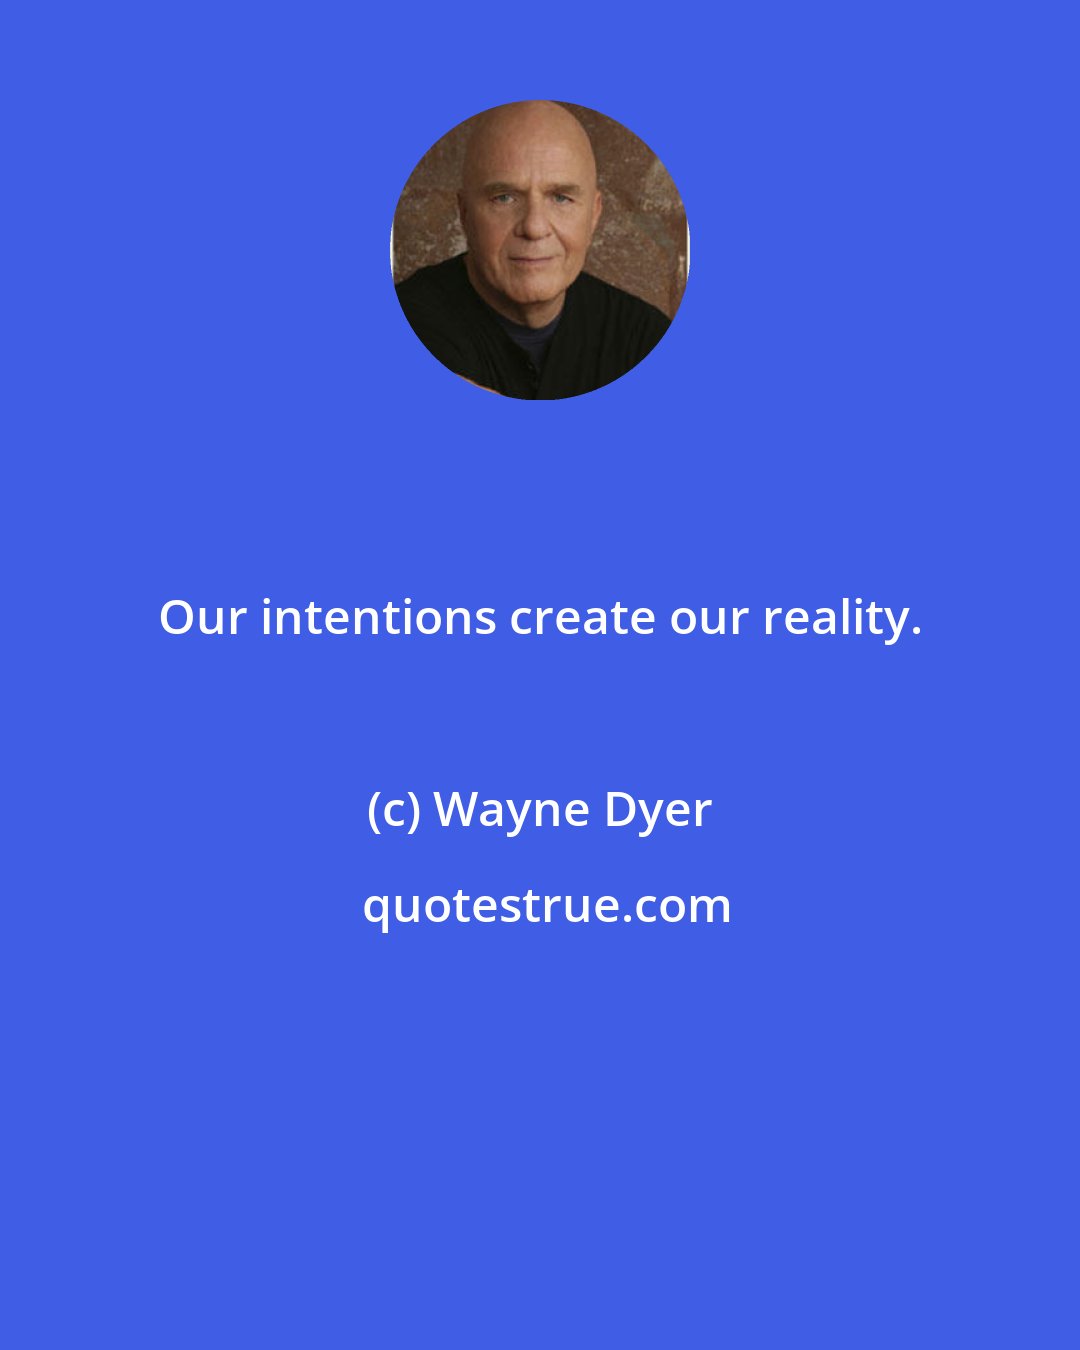 Wayne Dyer: Our intentions create our reality.